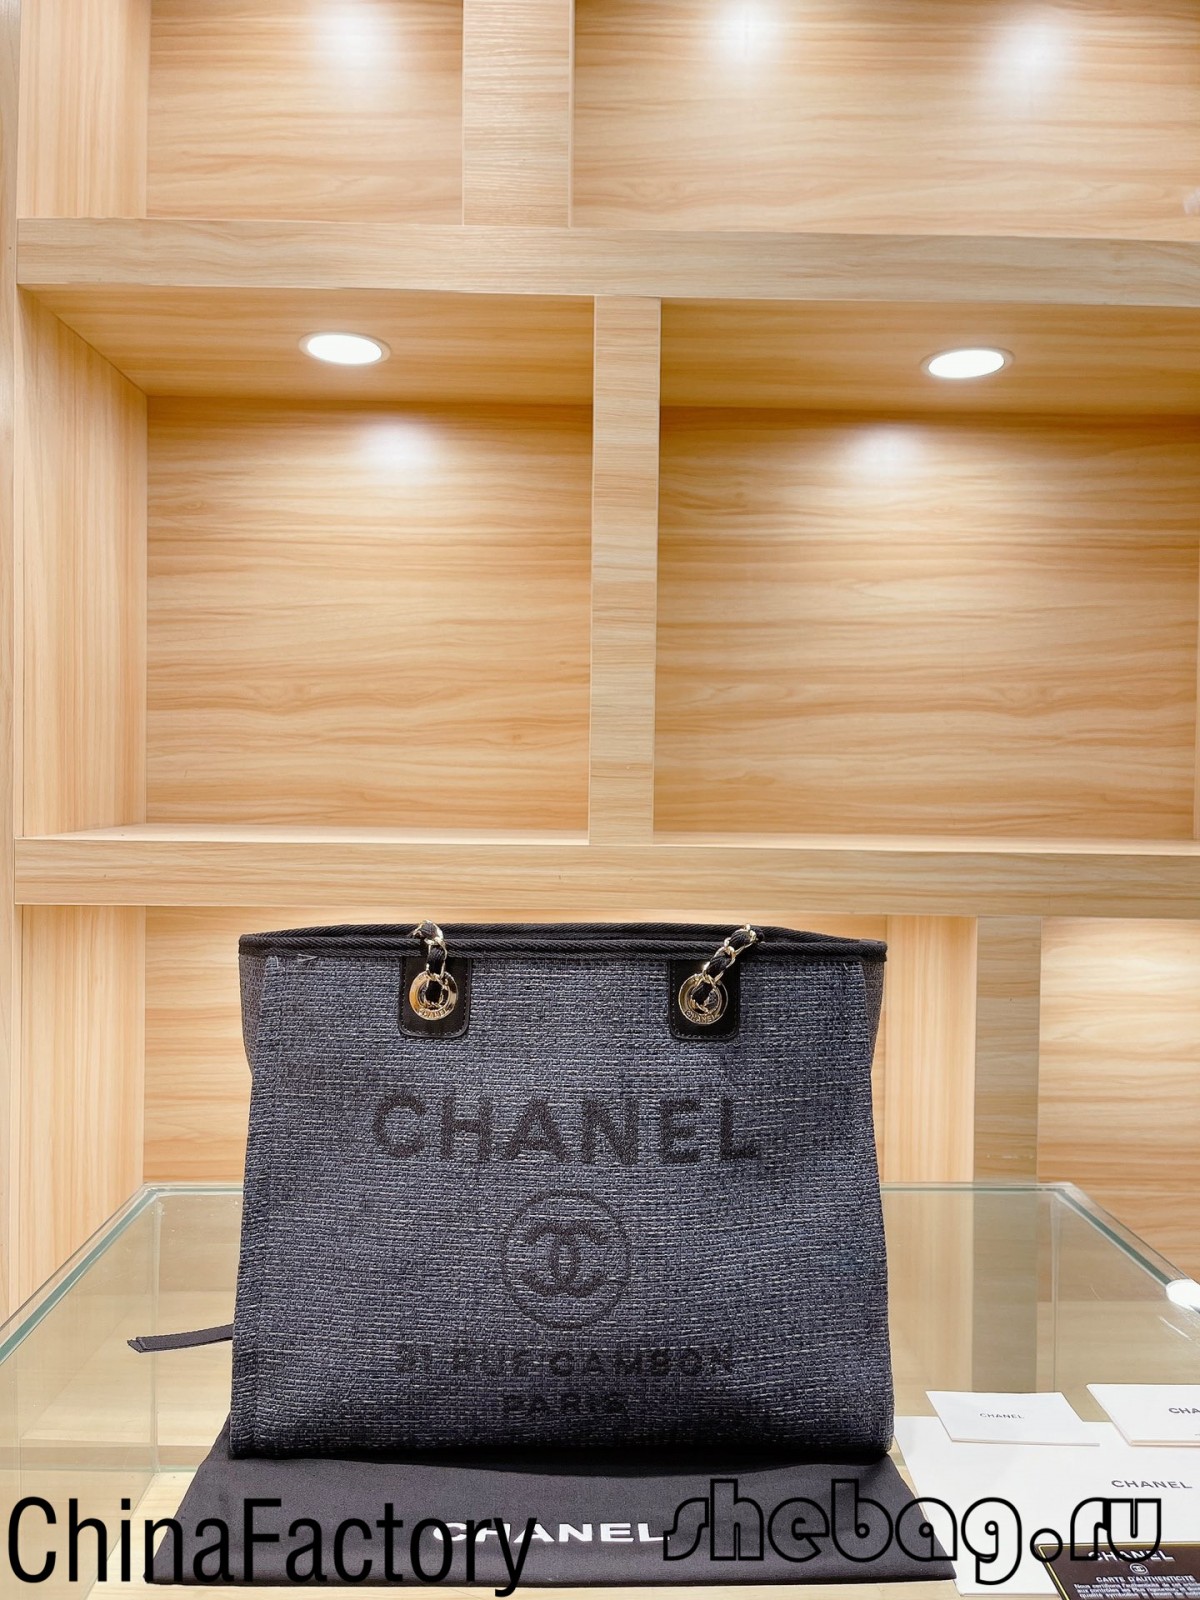 Chanel Deauville Canvas Tote bag replica wholesale seller recommendation (2022 Hottest)-Pinakamahusay na Marka ng Fake Louis Vuitton Bag Online Store, Replica designer bag ru